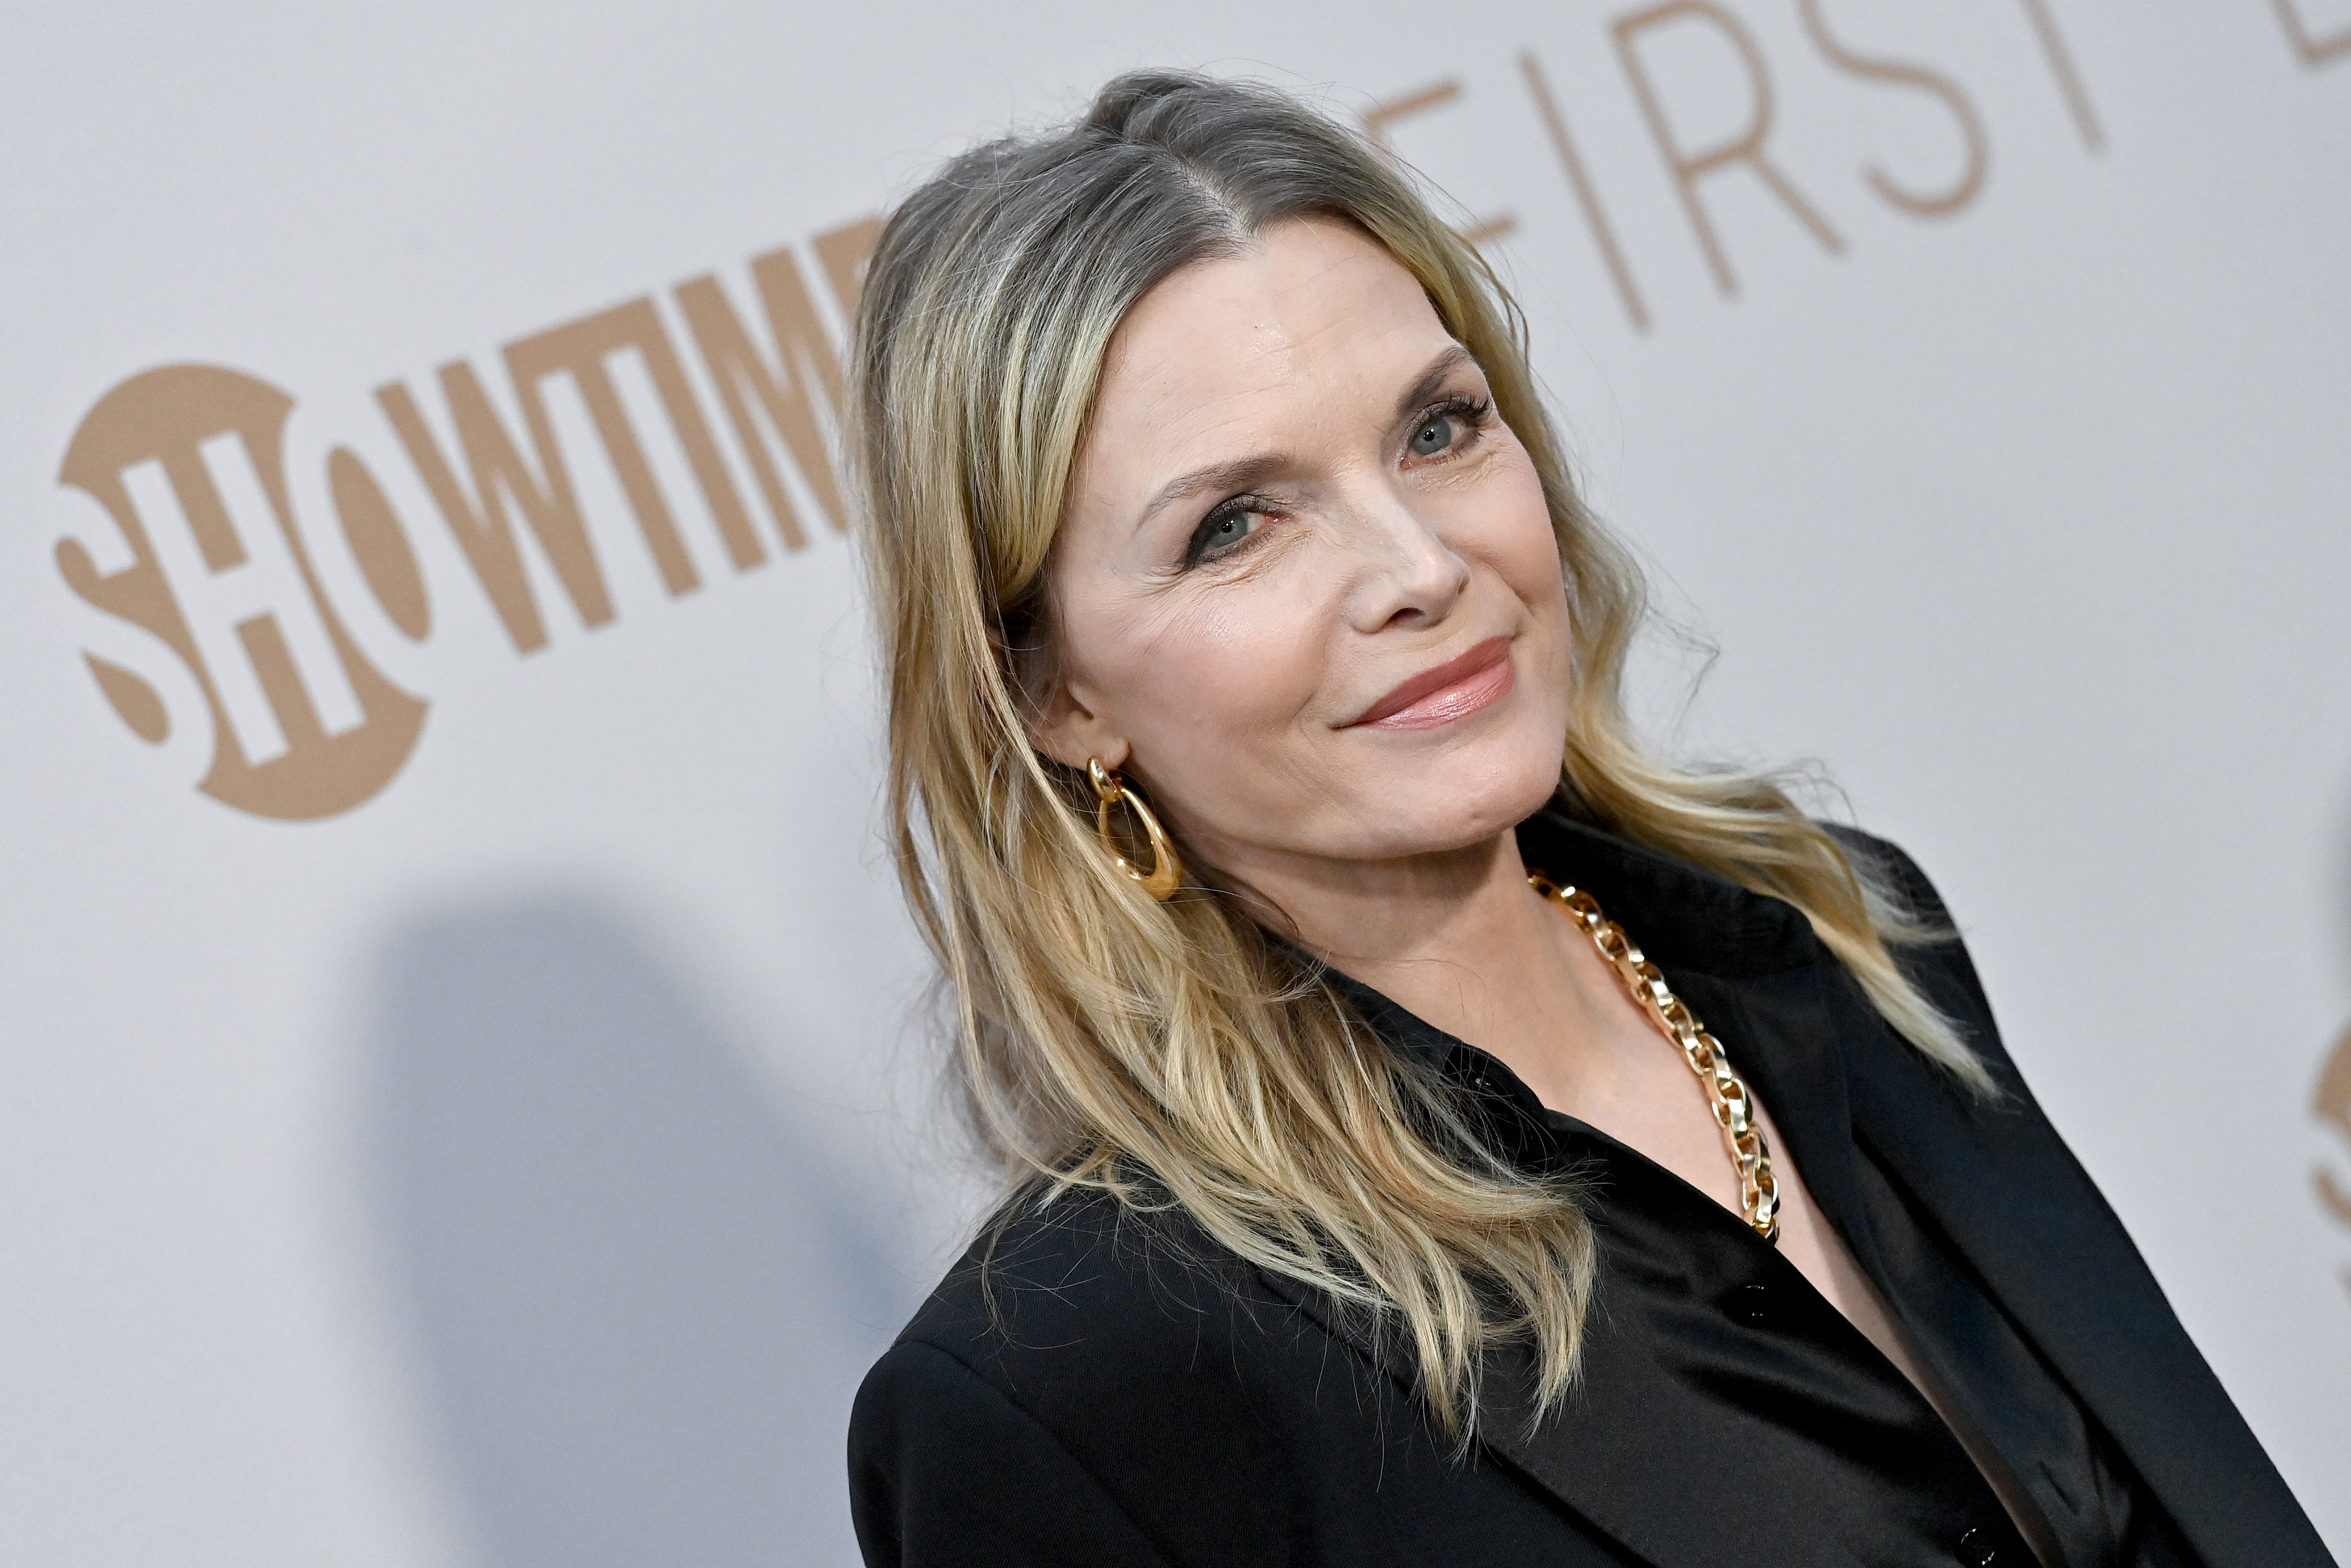 Michelle Pfeiffer ‘Excited and Ready’ to Be the New Face of ‘Yellowstone’: Source